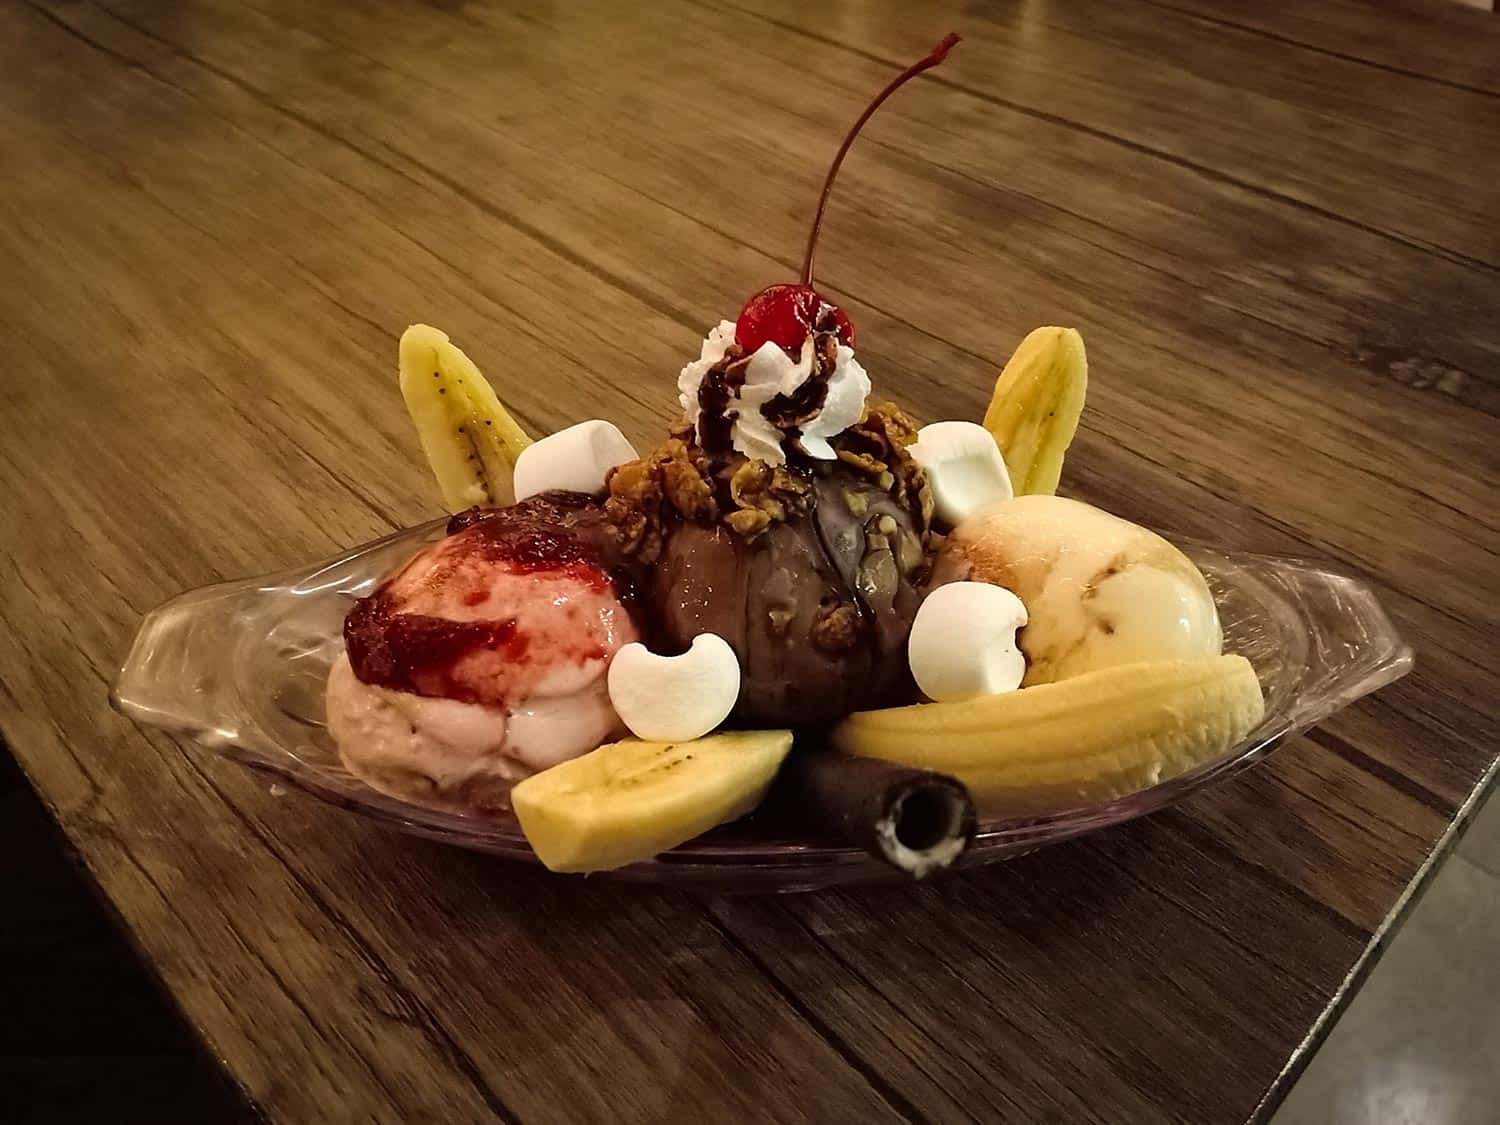 Split banana ice cream served with cherry fruit and banana pieces